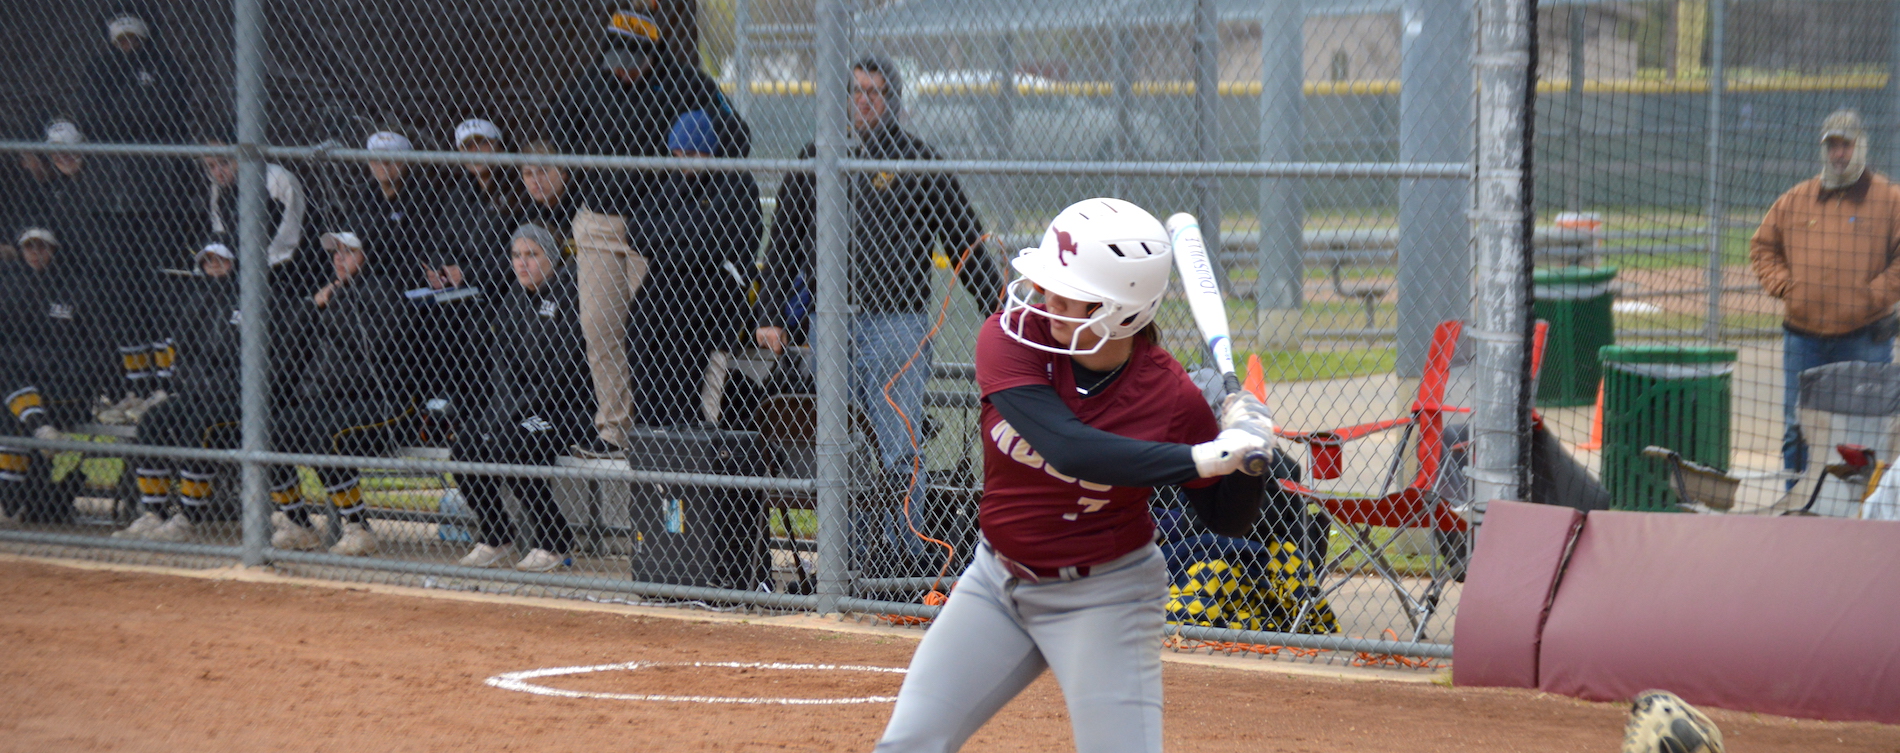 'Roos Fall Twice to No. 8 Texas Lutheran